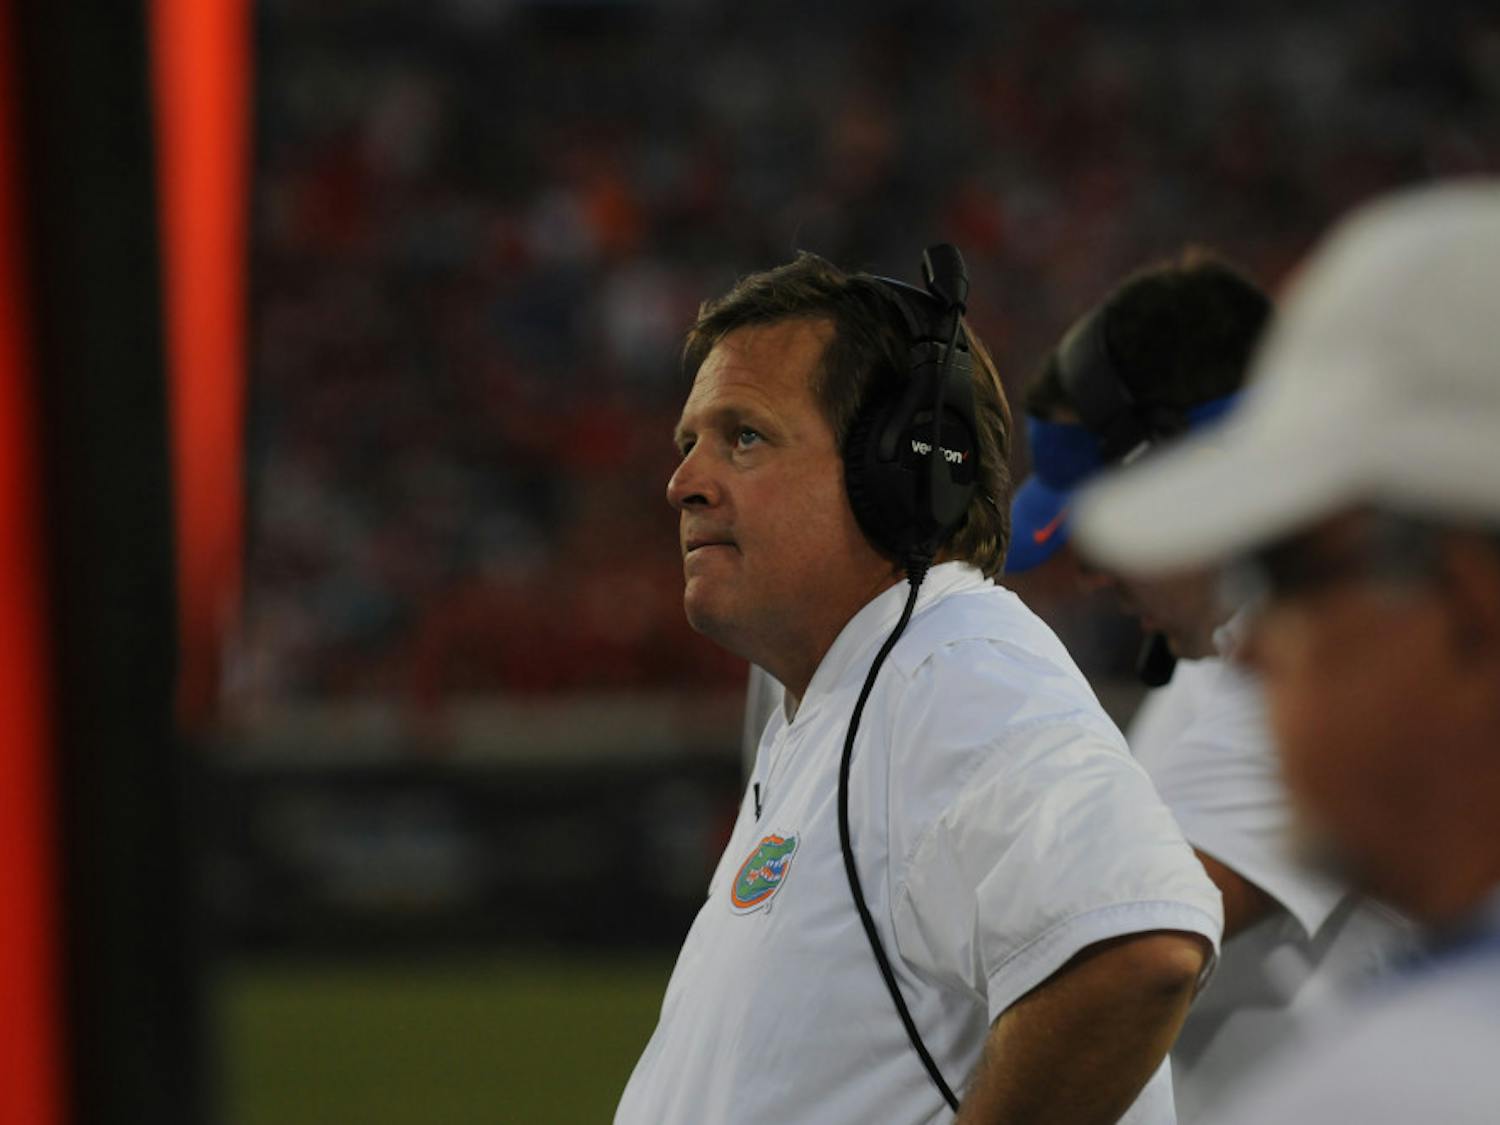 Coach Jim McElwain looks on during Florida's 24-10 win over Georgia on Oct. 29, 2016, in Jacksonville.